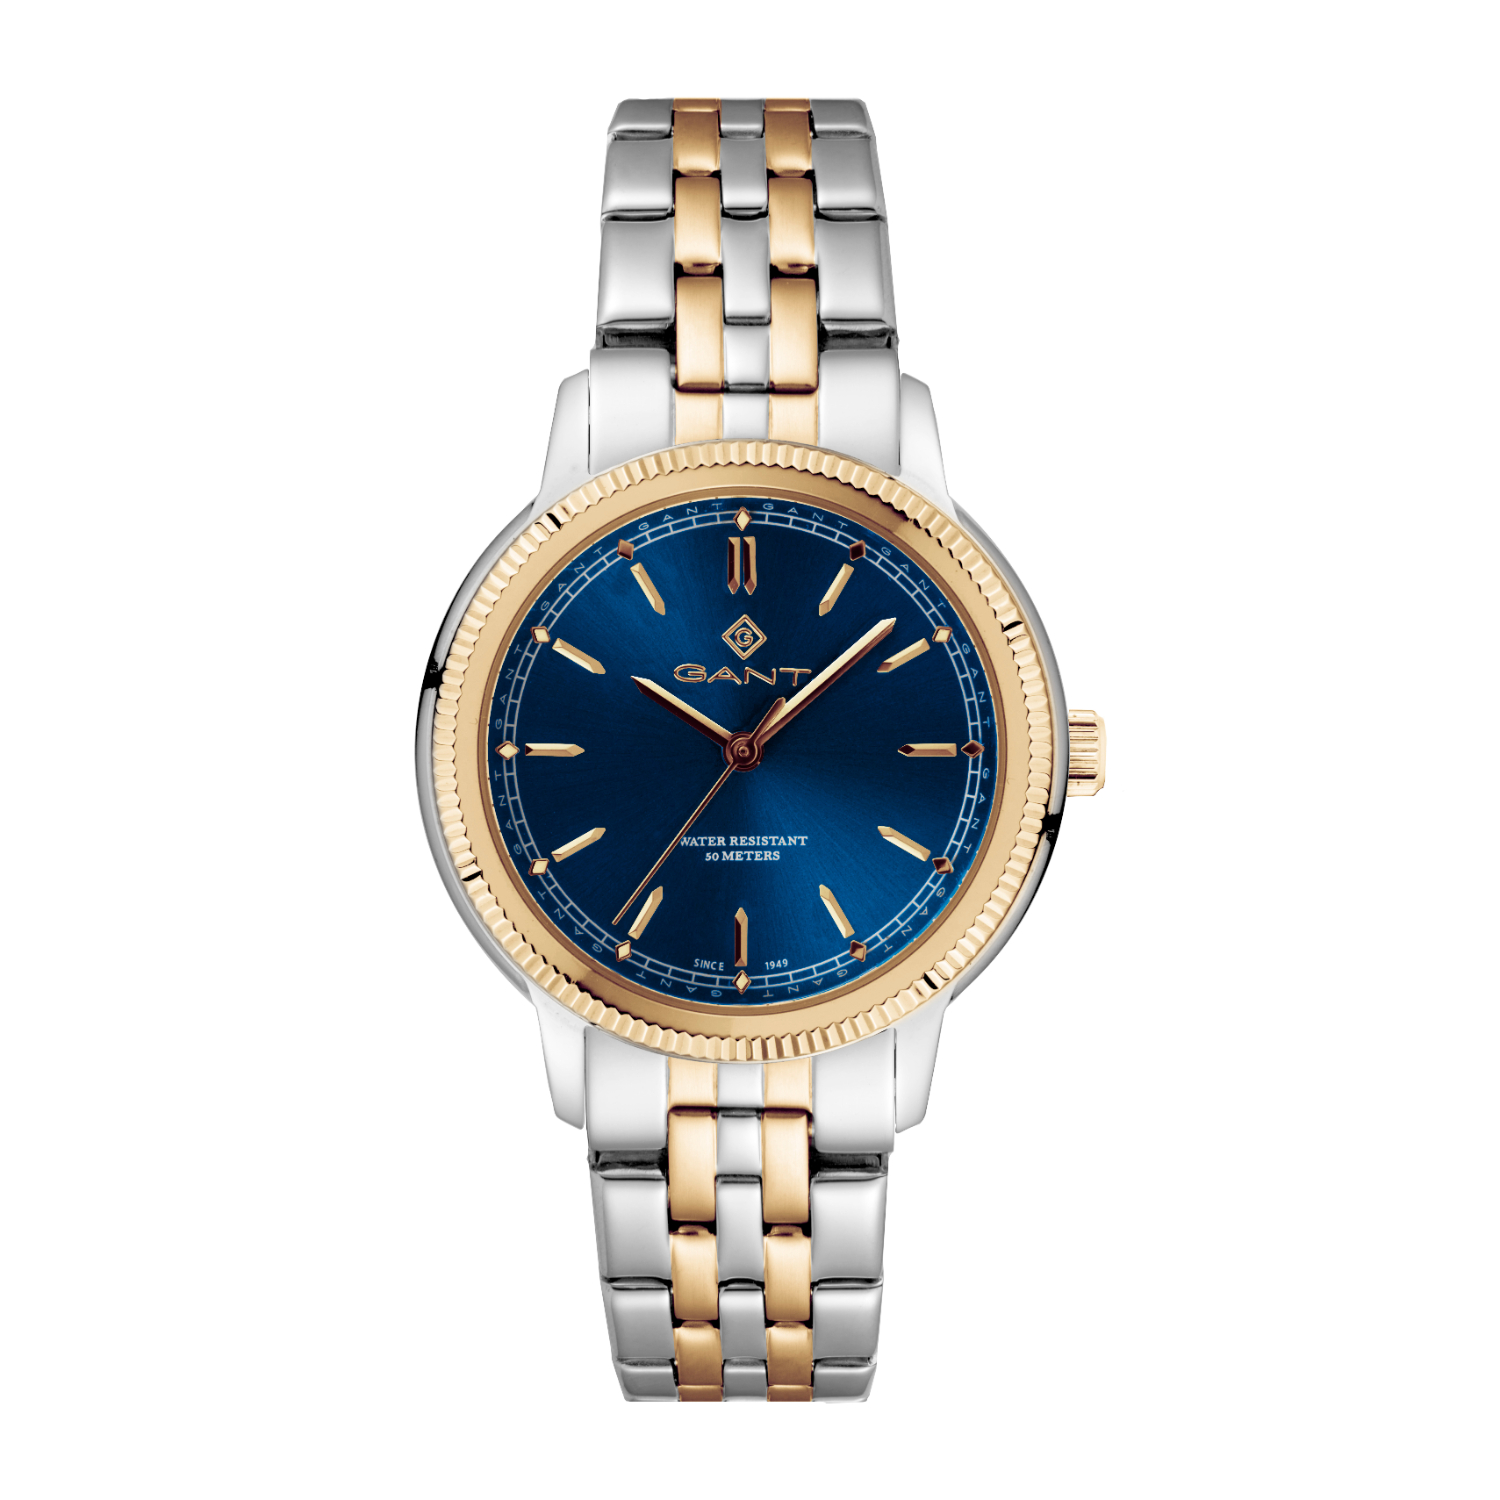 GANT womens watch in two-tone stainless steel with blue dial and bracelet.